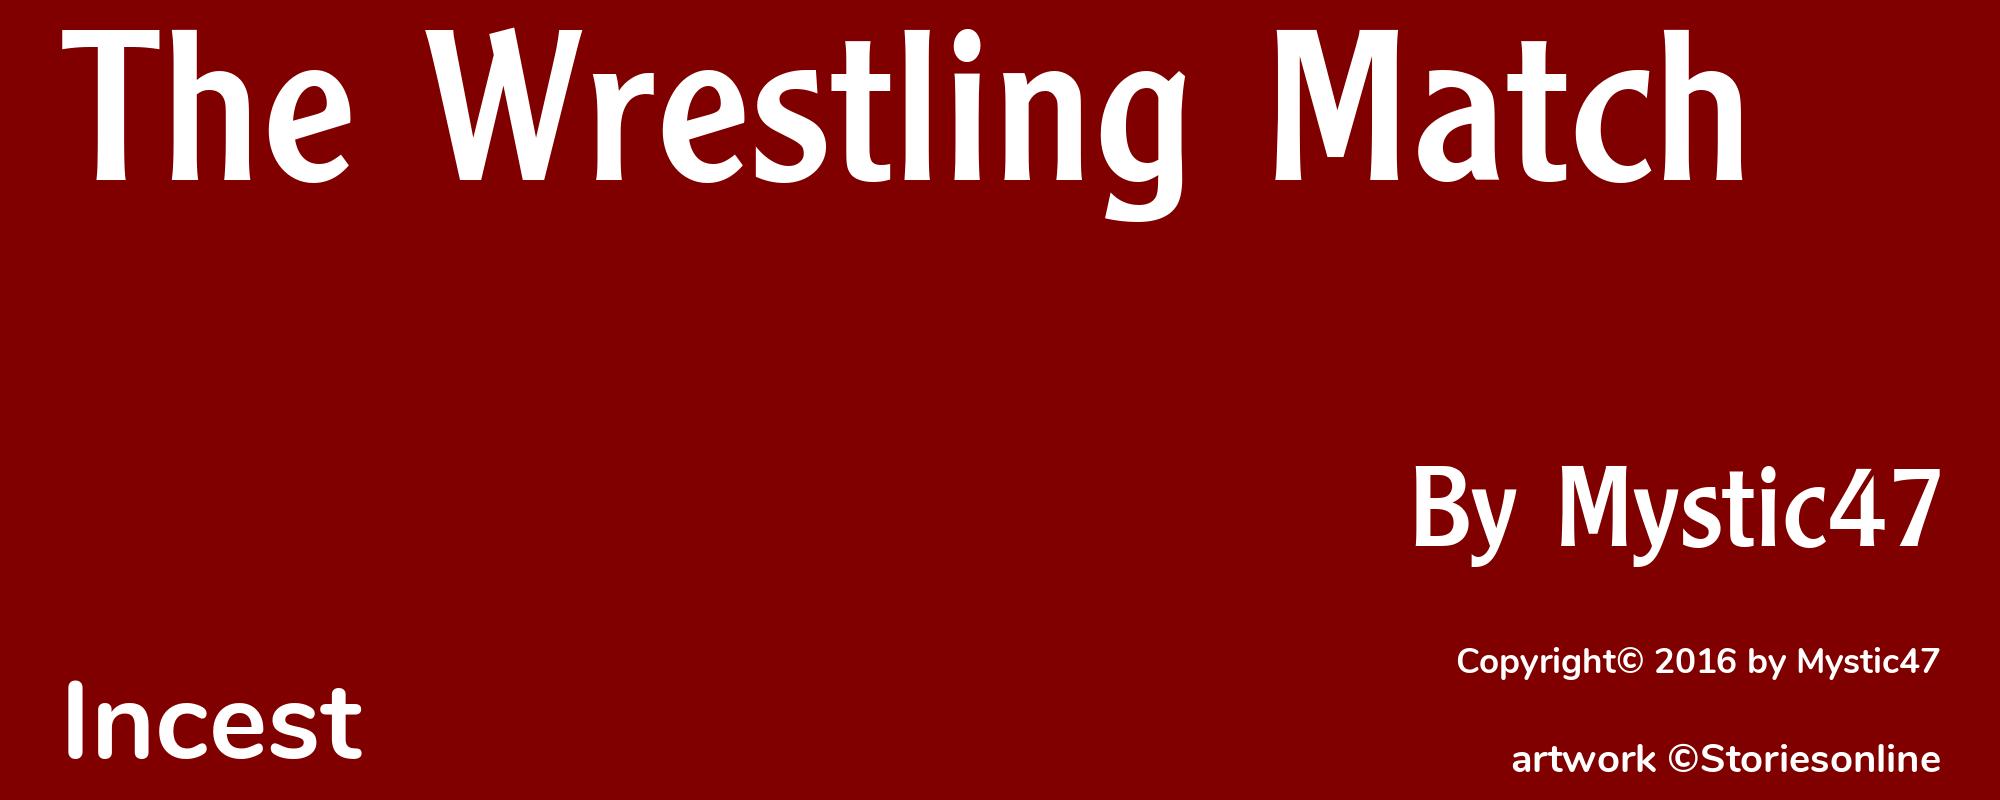 The Wrestling Match - Cover